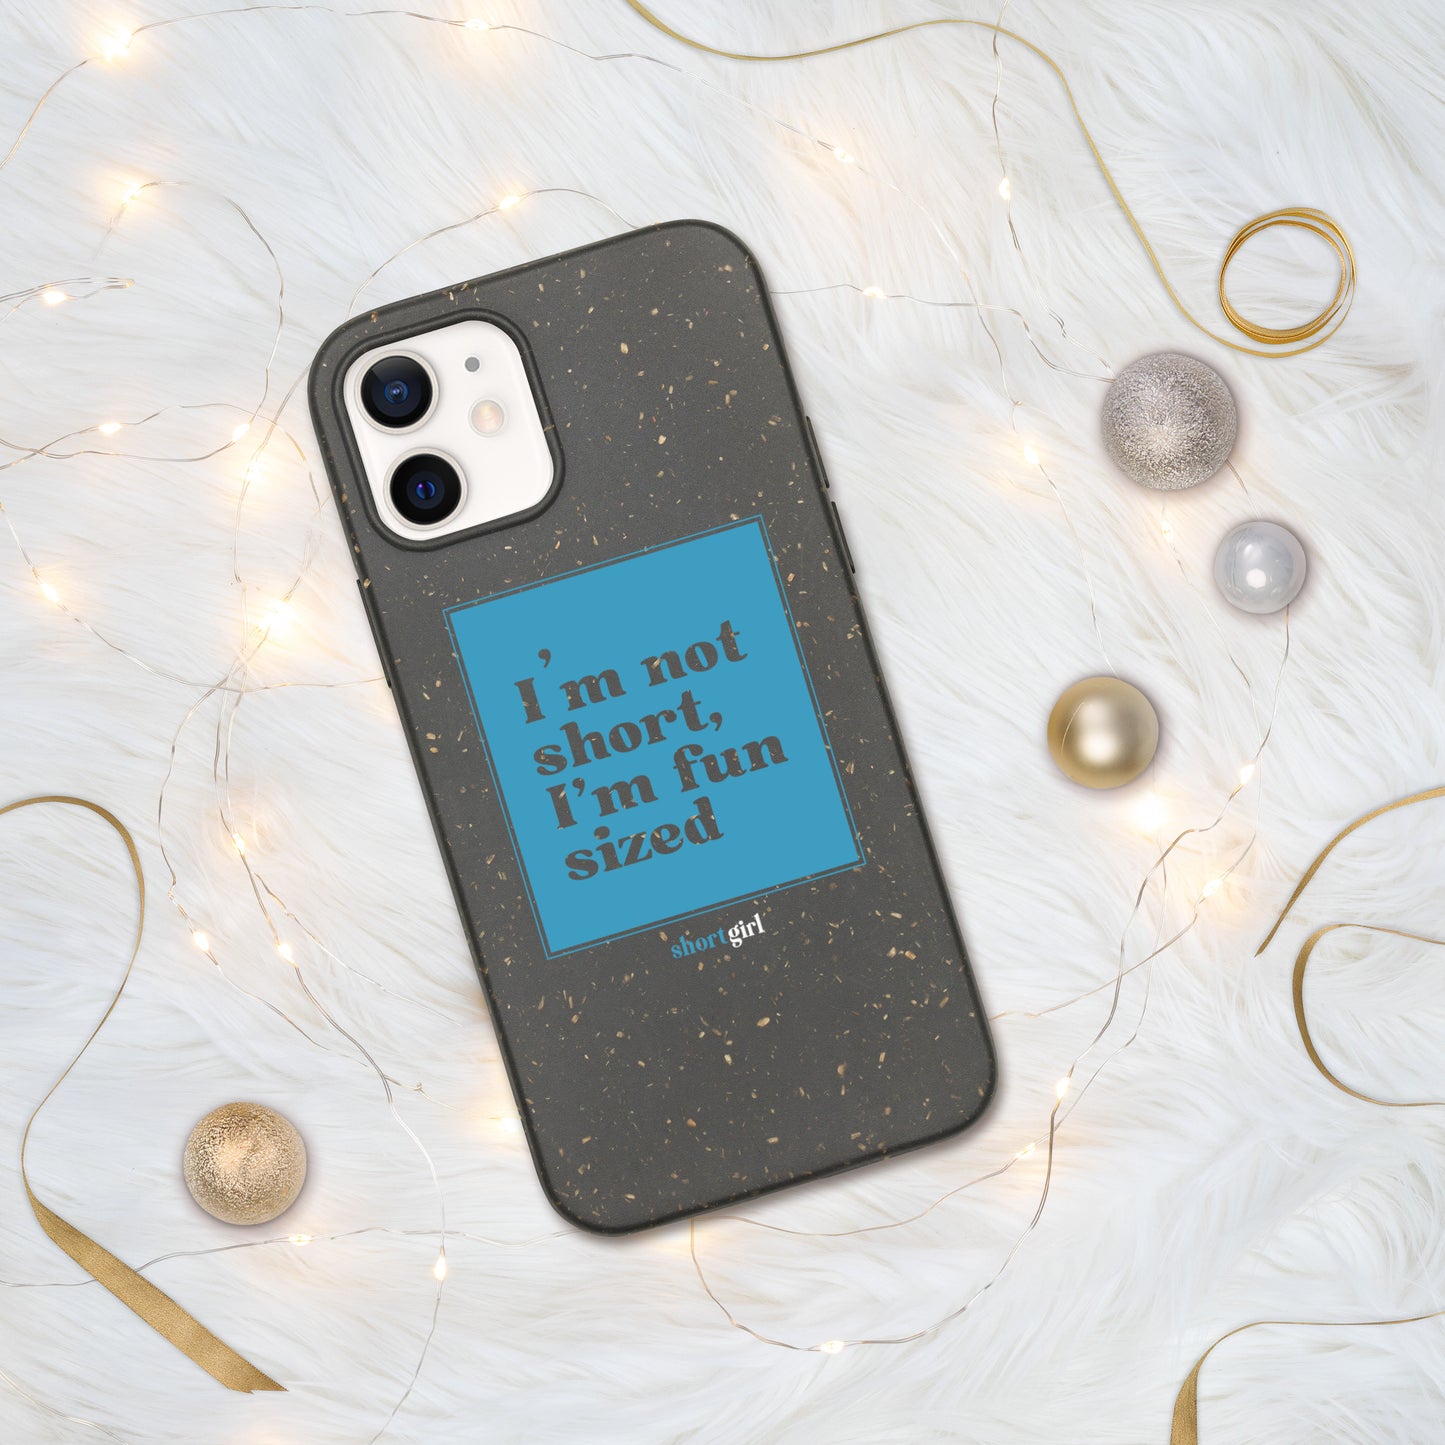 Speckled iPhone case - I'm not short, I'm fun sized